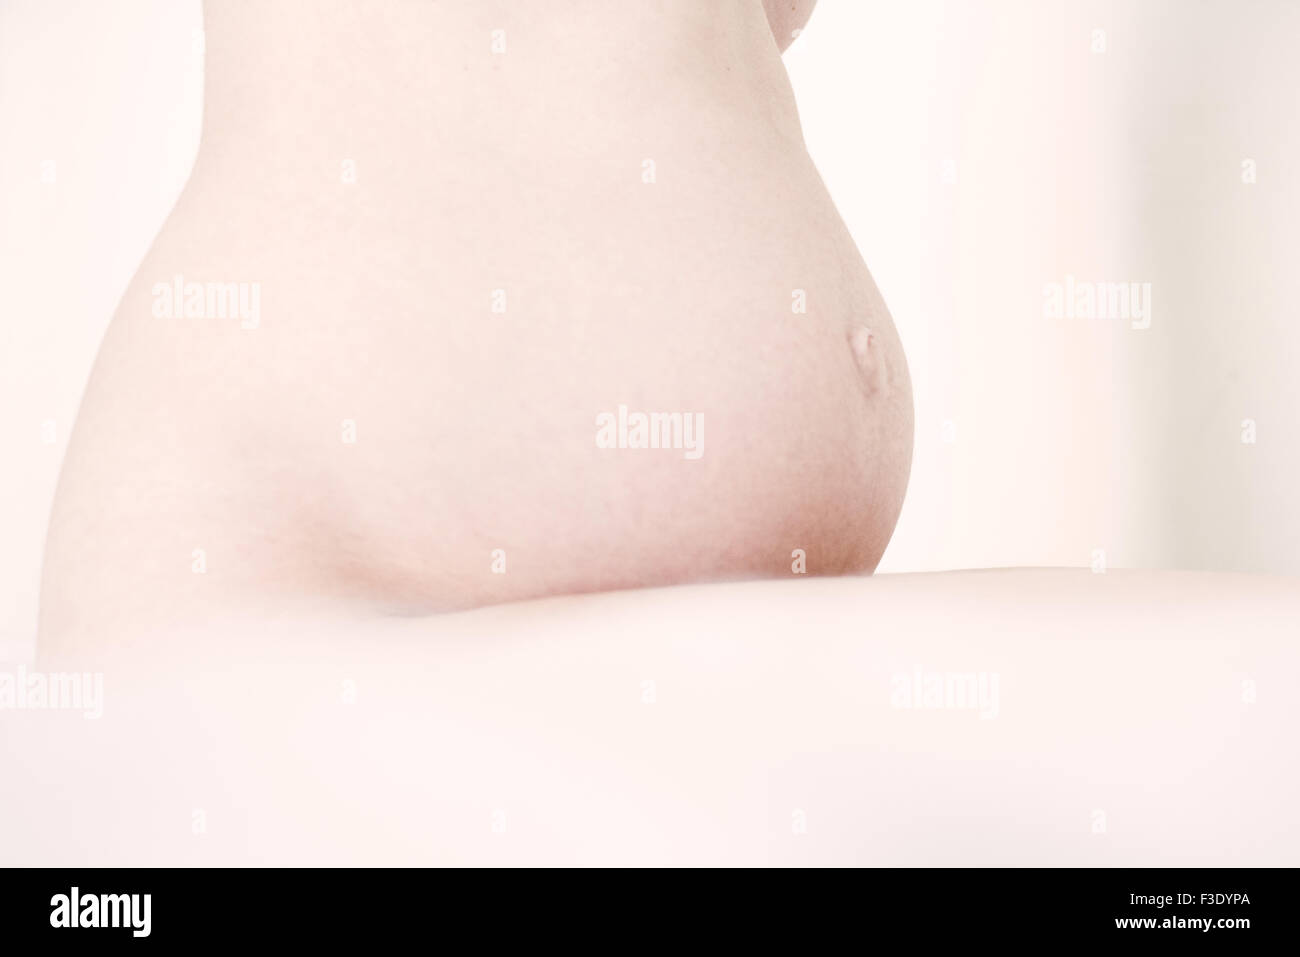 Pregnant woman's bare stomach, side view Stock Photo